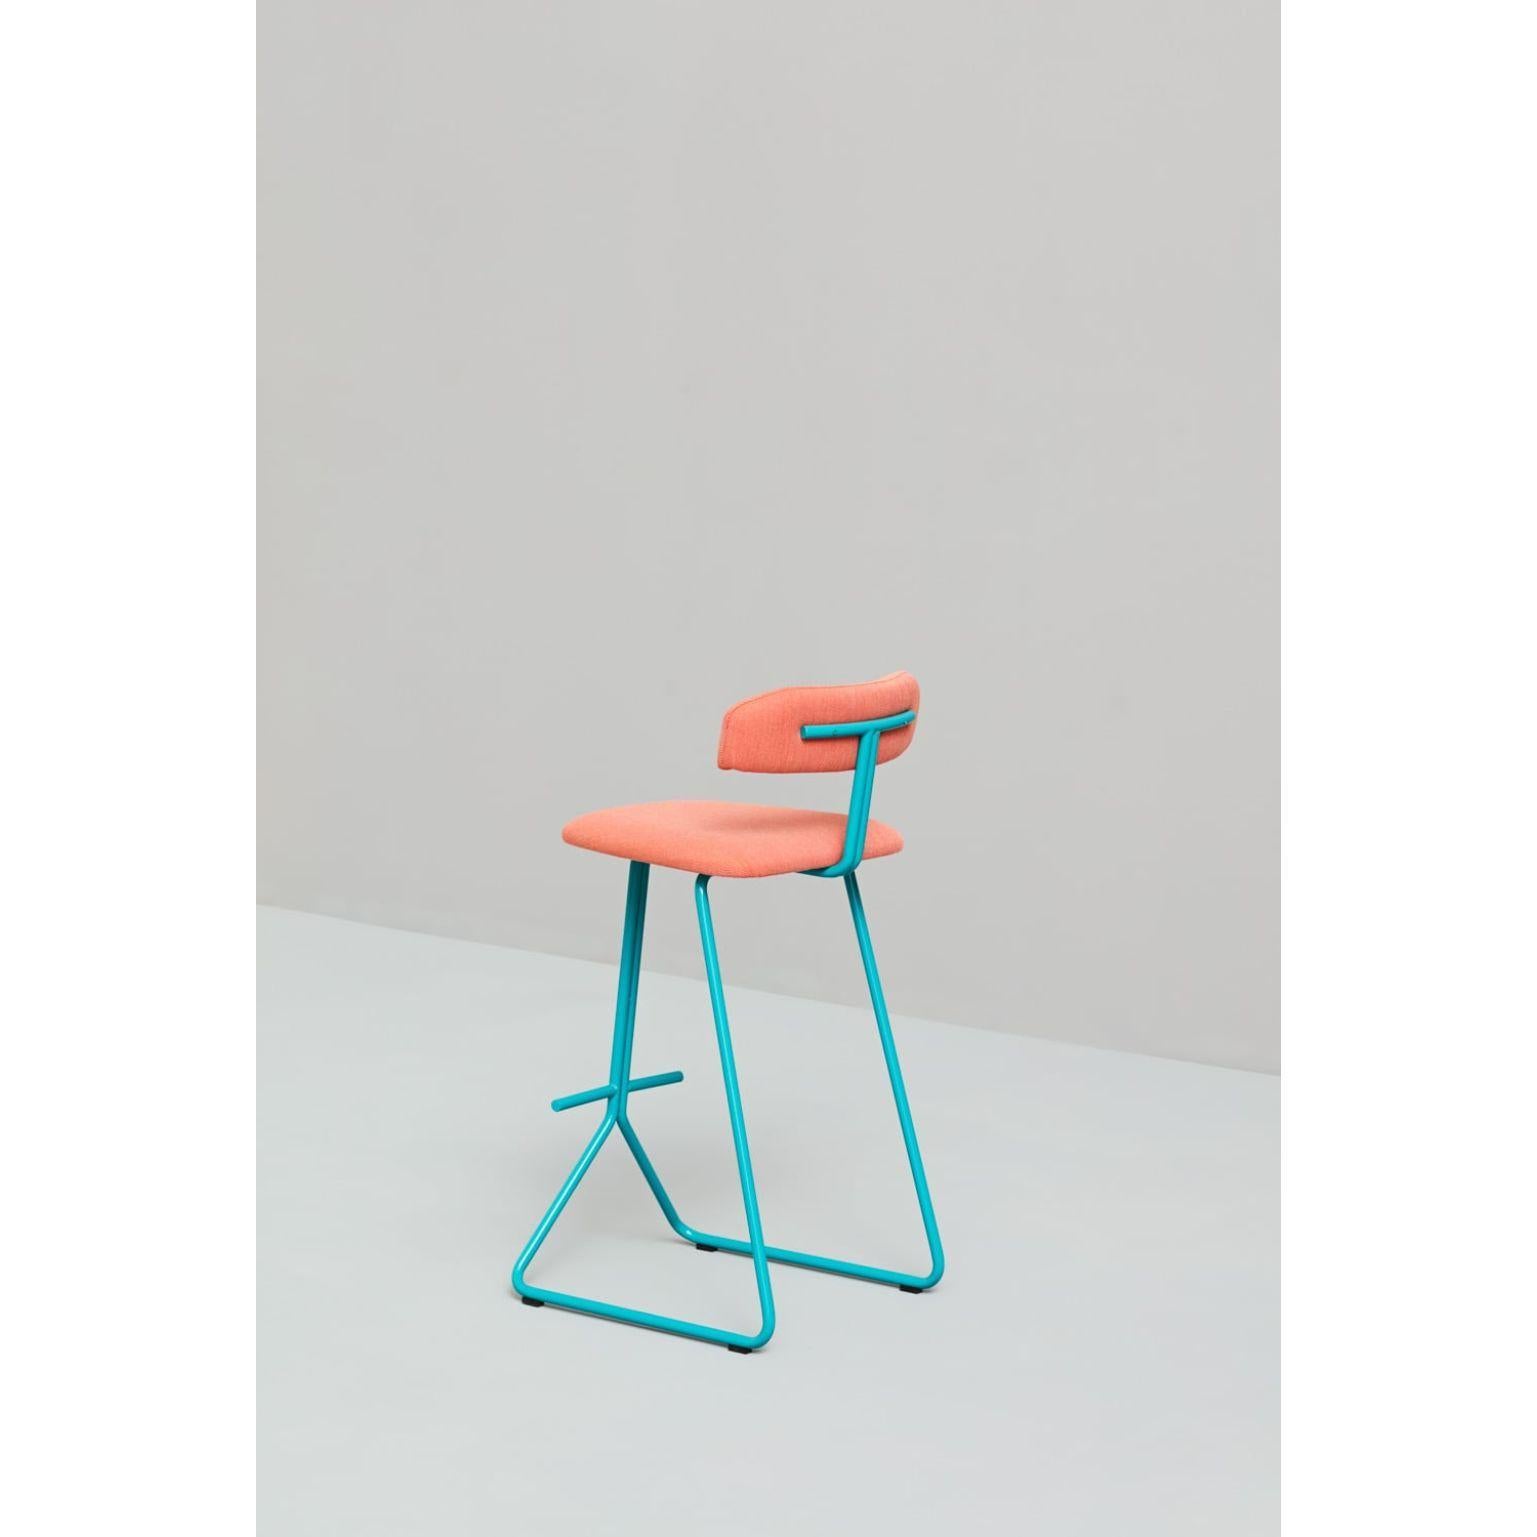 Set of rider stool & chair by Pepe Albargues
Dimensions: Stool W50, D56, H104, Seat78, Chair W50, D56, H82, Seat 48
Materials: Crome plated or painted iron structure
Foam CMHR (high resilience and flame retardant) for all our cushion filling